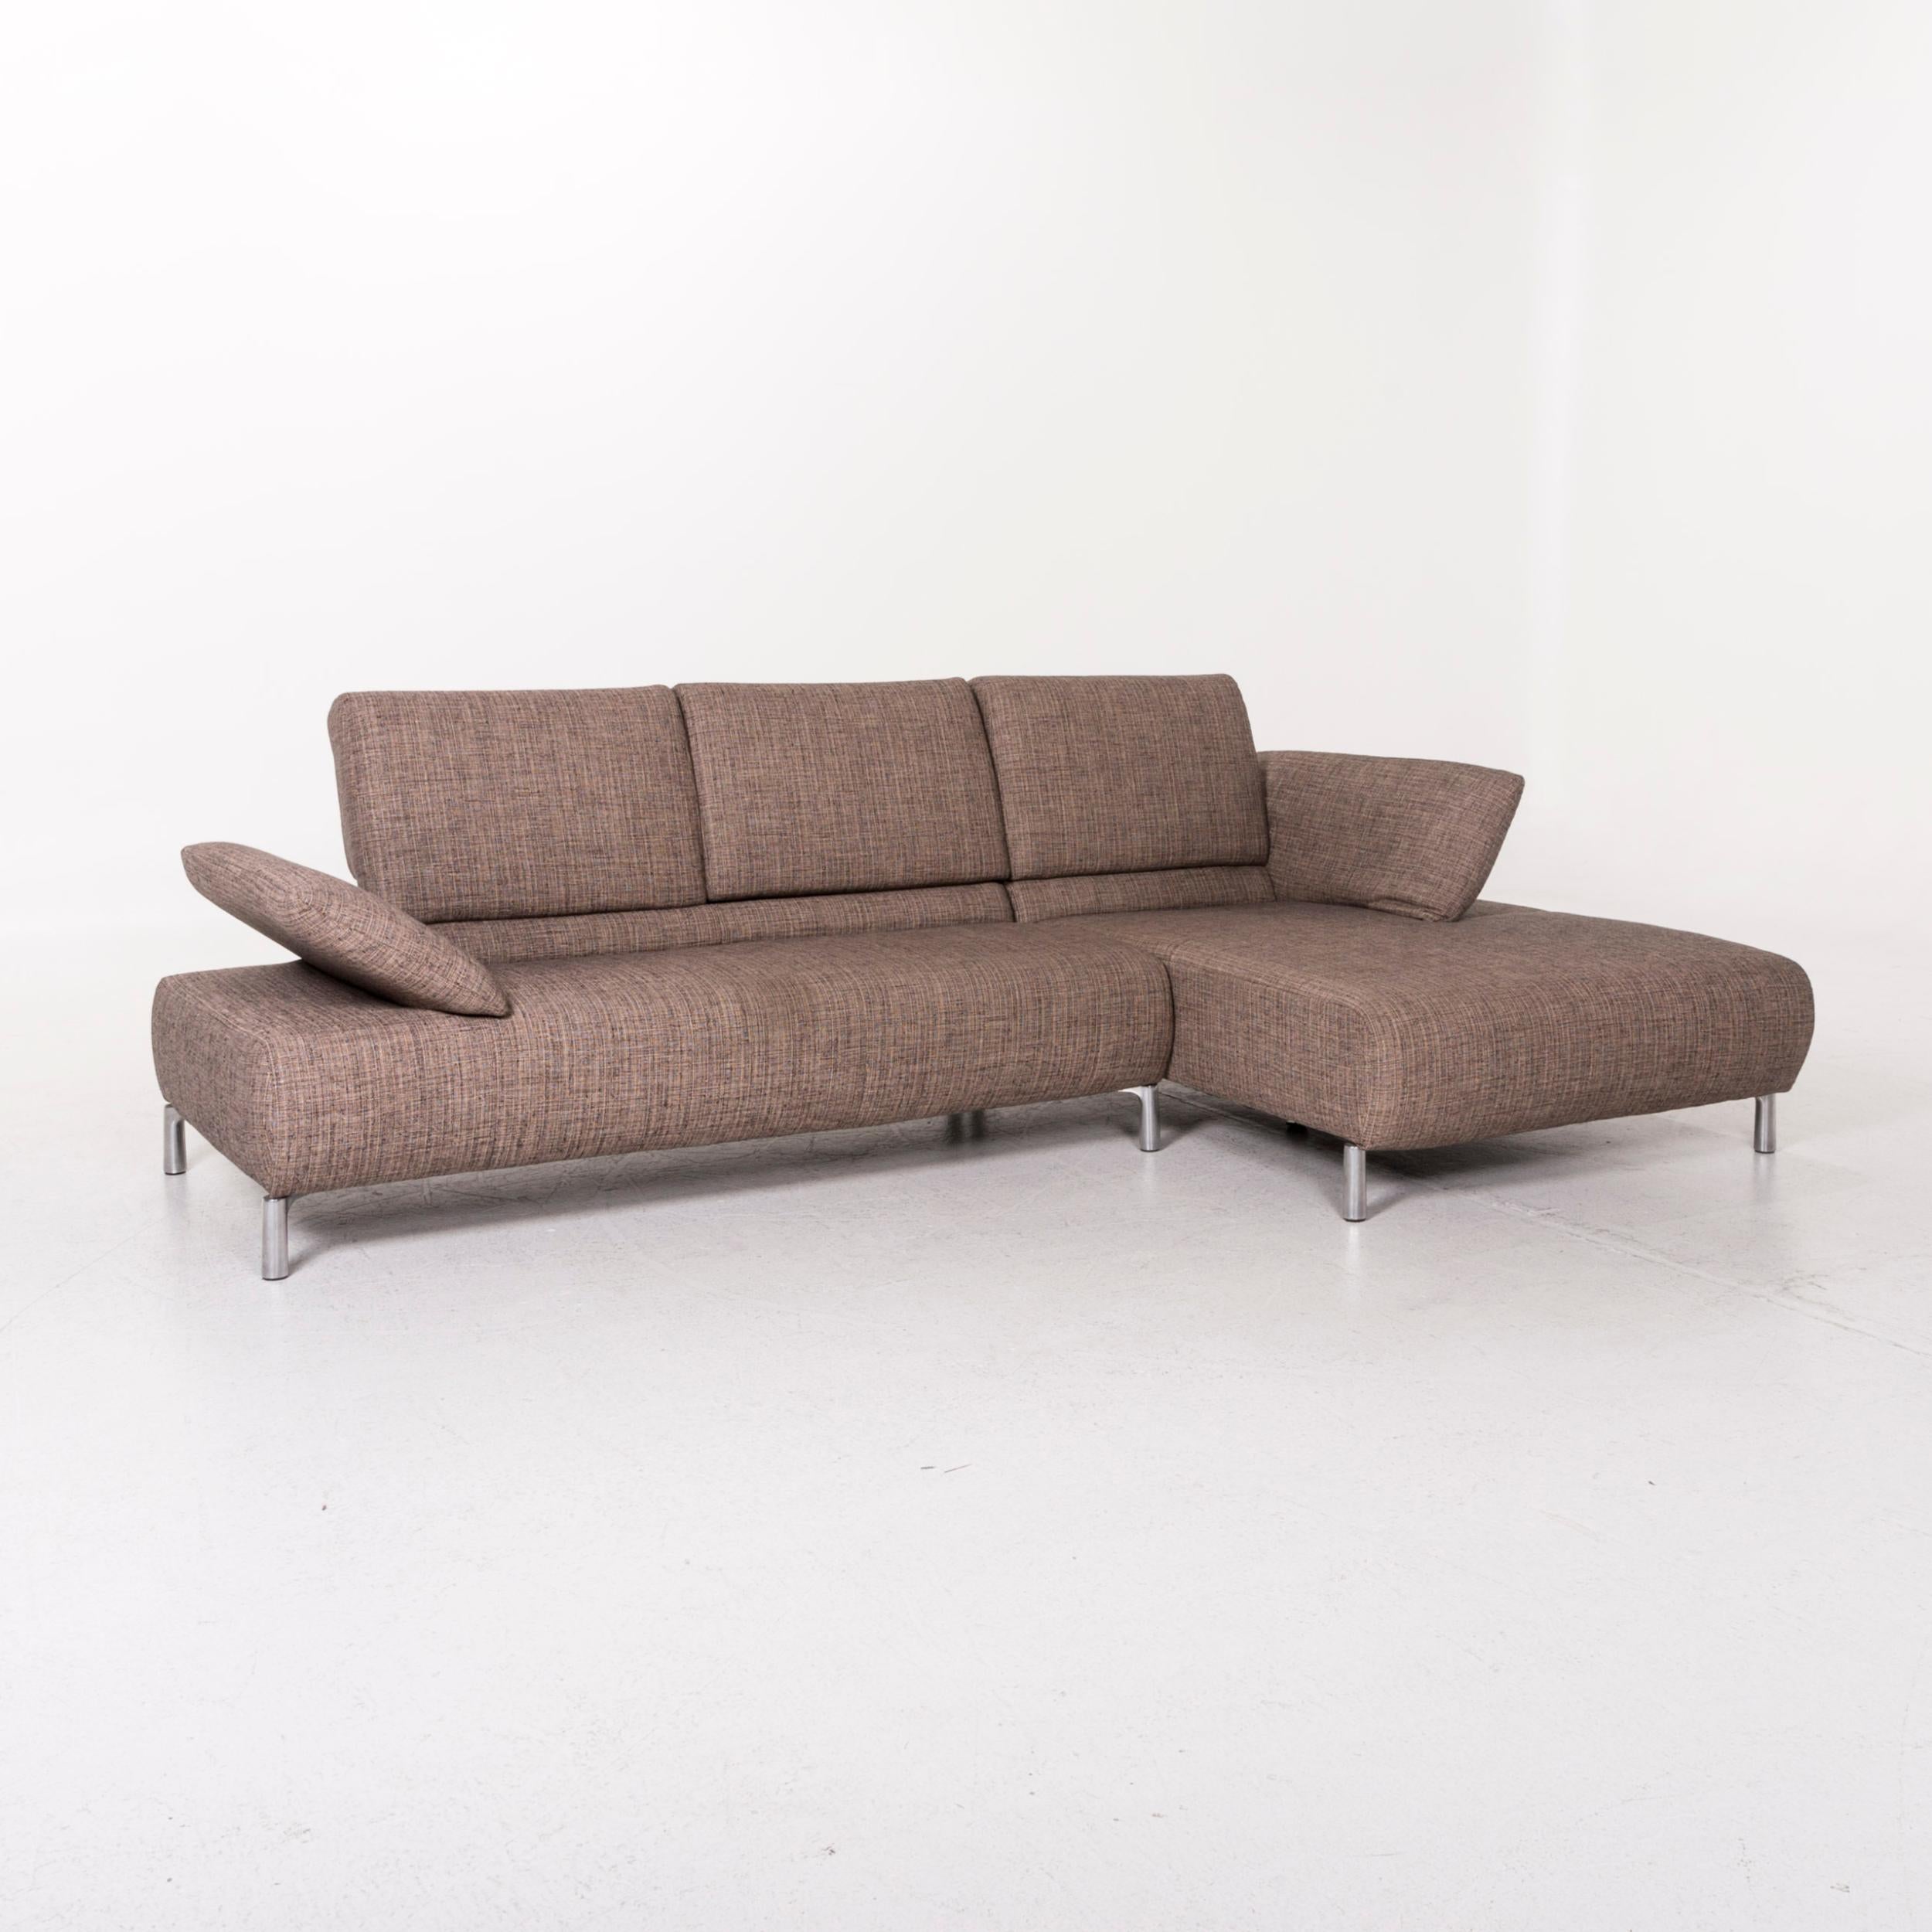 We bring to you a Koinor fabric corner sofa brown sofa function couch.

 

 Product measurements in centimeters:
 

Depth 156
Width 282
Height 83
Seat-height 42
Rest-height 52
Seat-depth 64
Seat-width 204
Back-height 41.